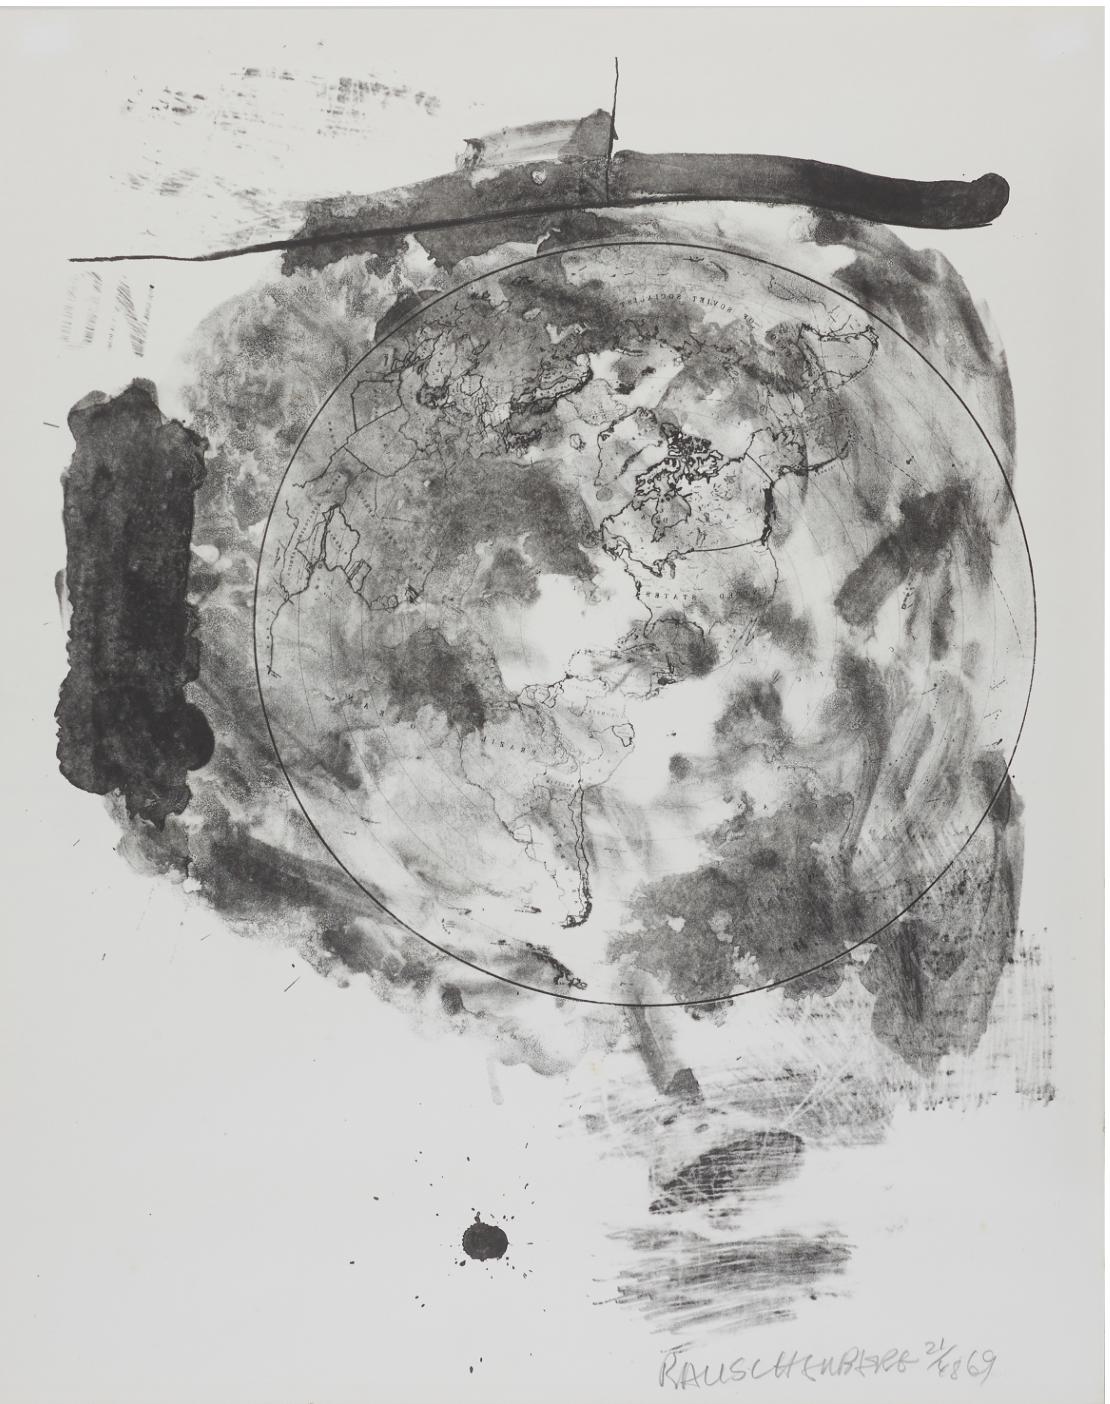 Robert Rauschenberg (born 1925): Stoned Moon series medallion, 1969, signed numbered and dated Rauschenberg 21/48, -69. Edited by Gemini GEL (blind stamp), lithograph 81.3 x 64.8 cm. (32